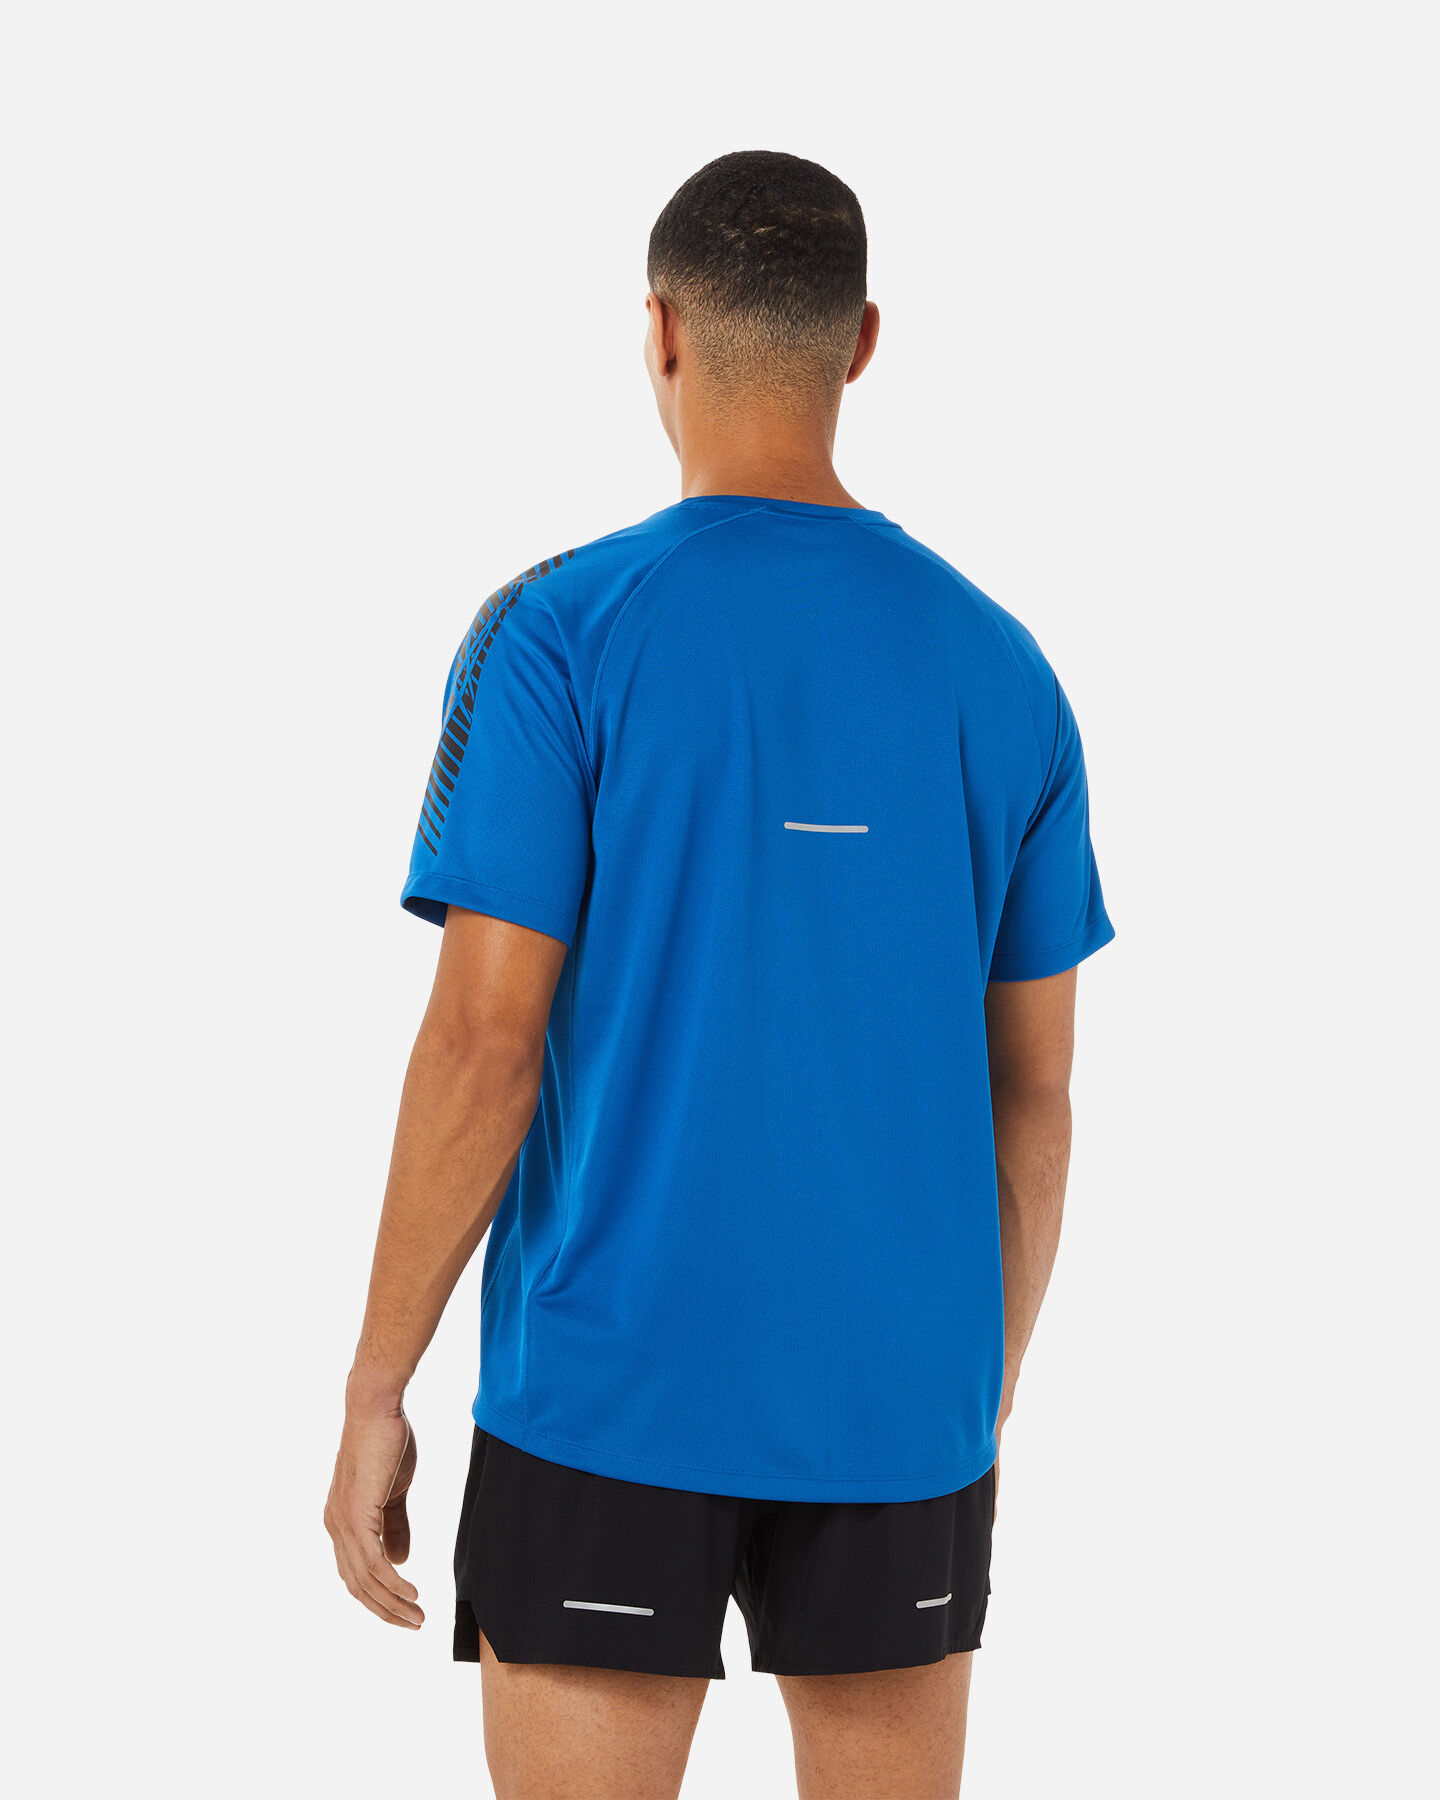  T-Shirt running ASICS ICON M S5385275|405|S scatto 2